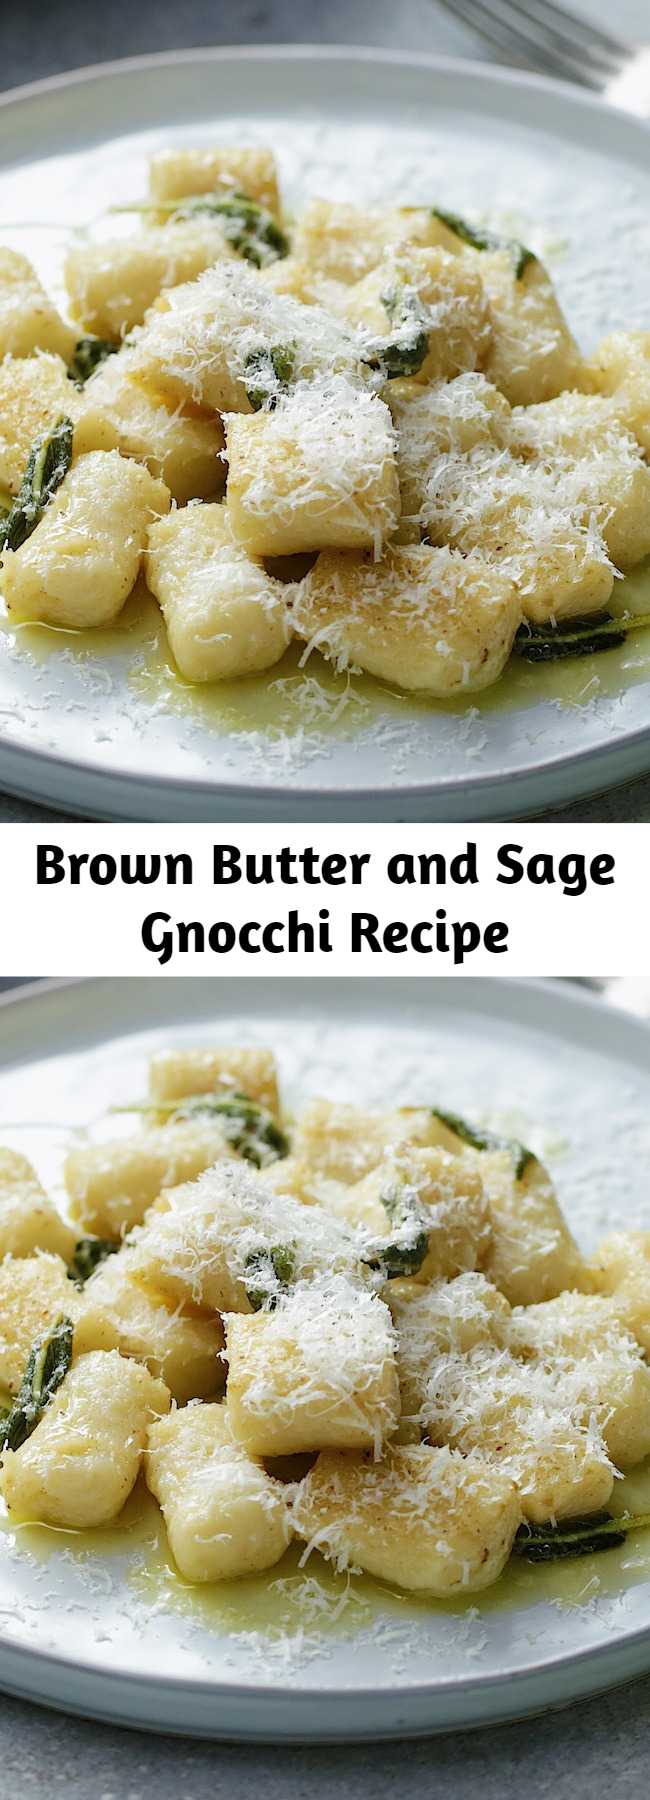 Brown Butter and Sage Gnocchi Recipe - Delicious homemade gnocchi with a simple brown butter and sage sauce. An easy twist on your classic Italian gnocchi.